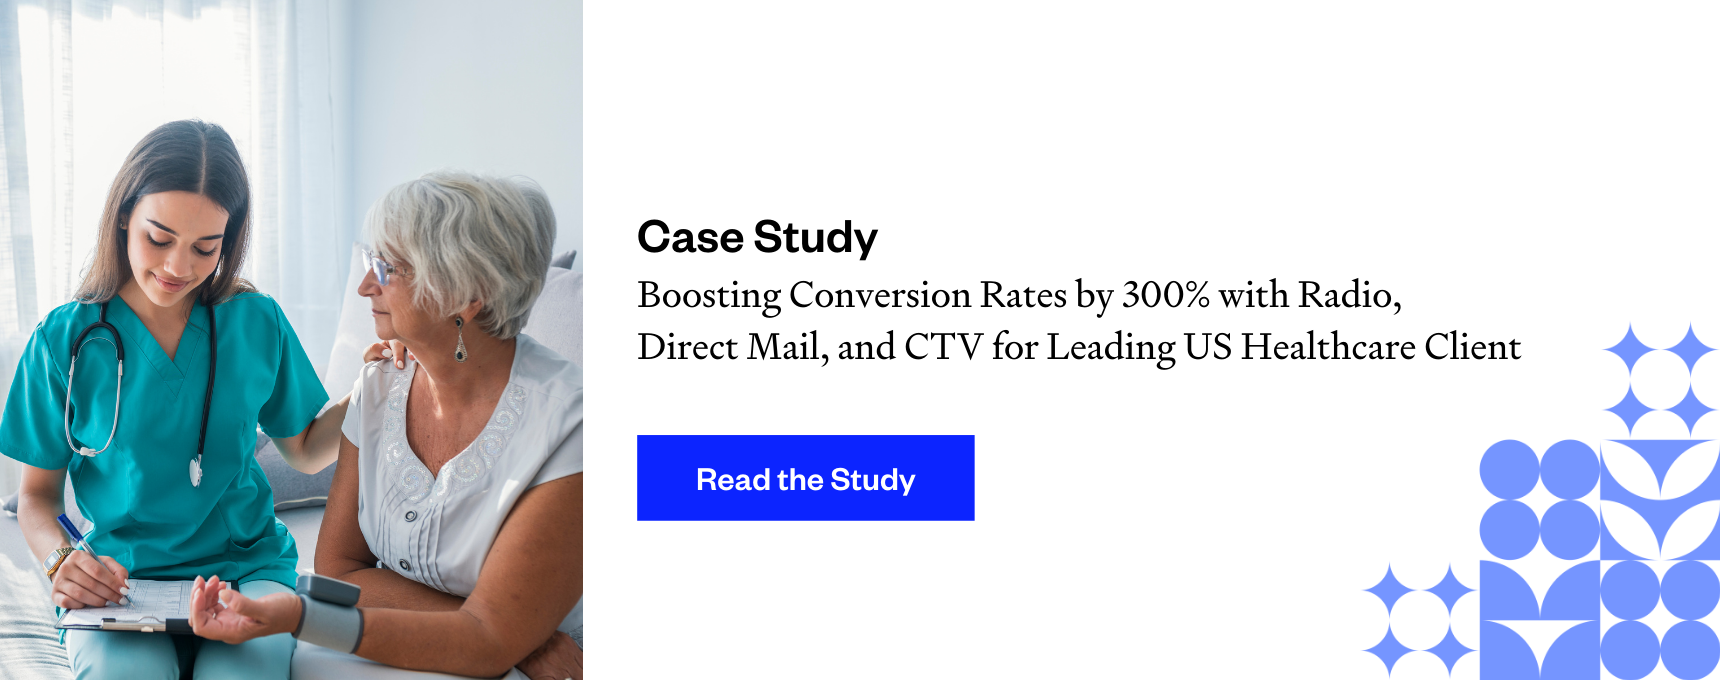 Boosting conversion rates by 300% with radio, direct mail, and CTV for leading US healthcare client